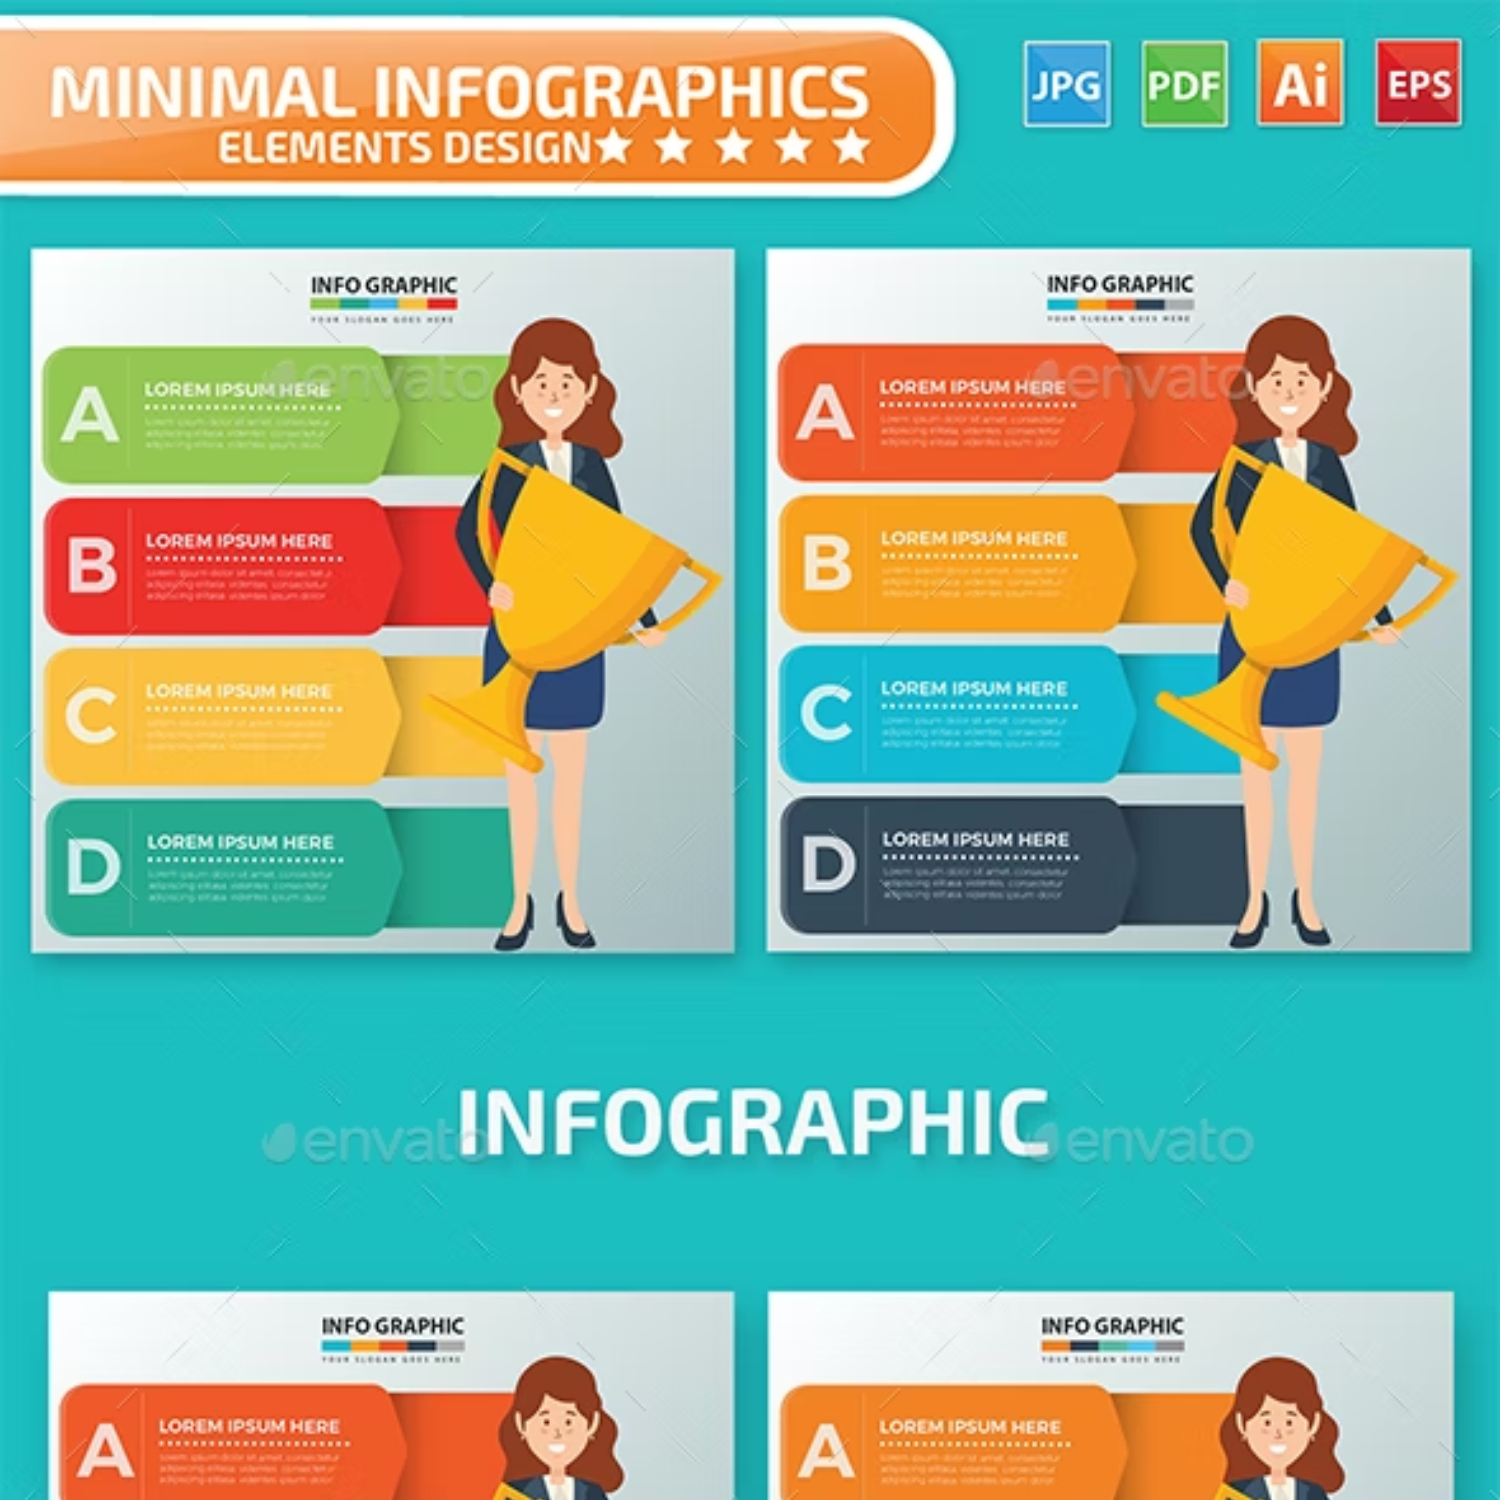 Woman Infographic Design Main Cover.